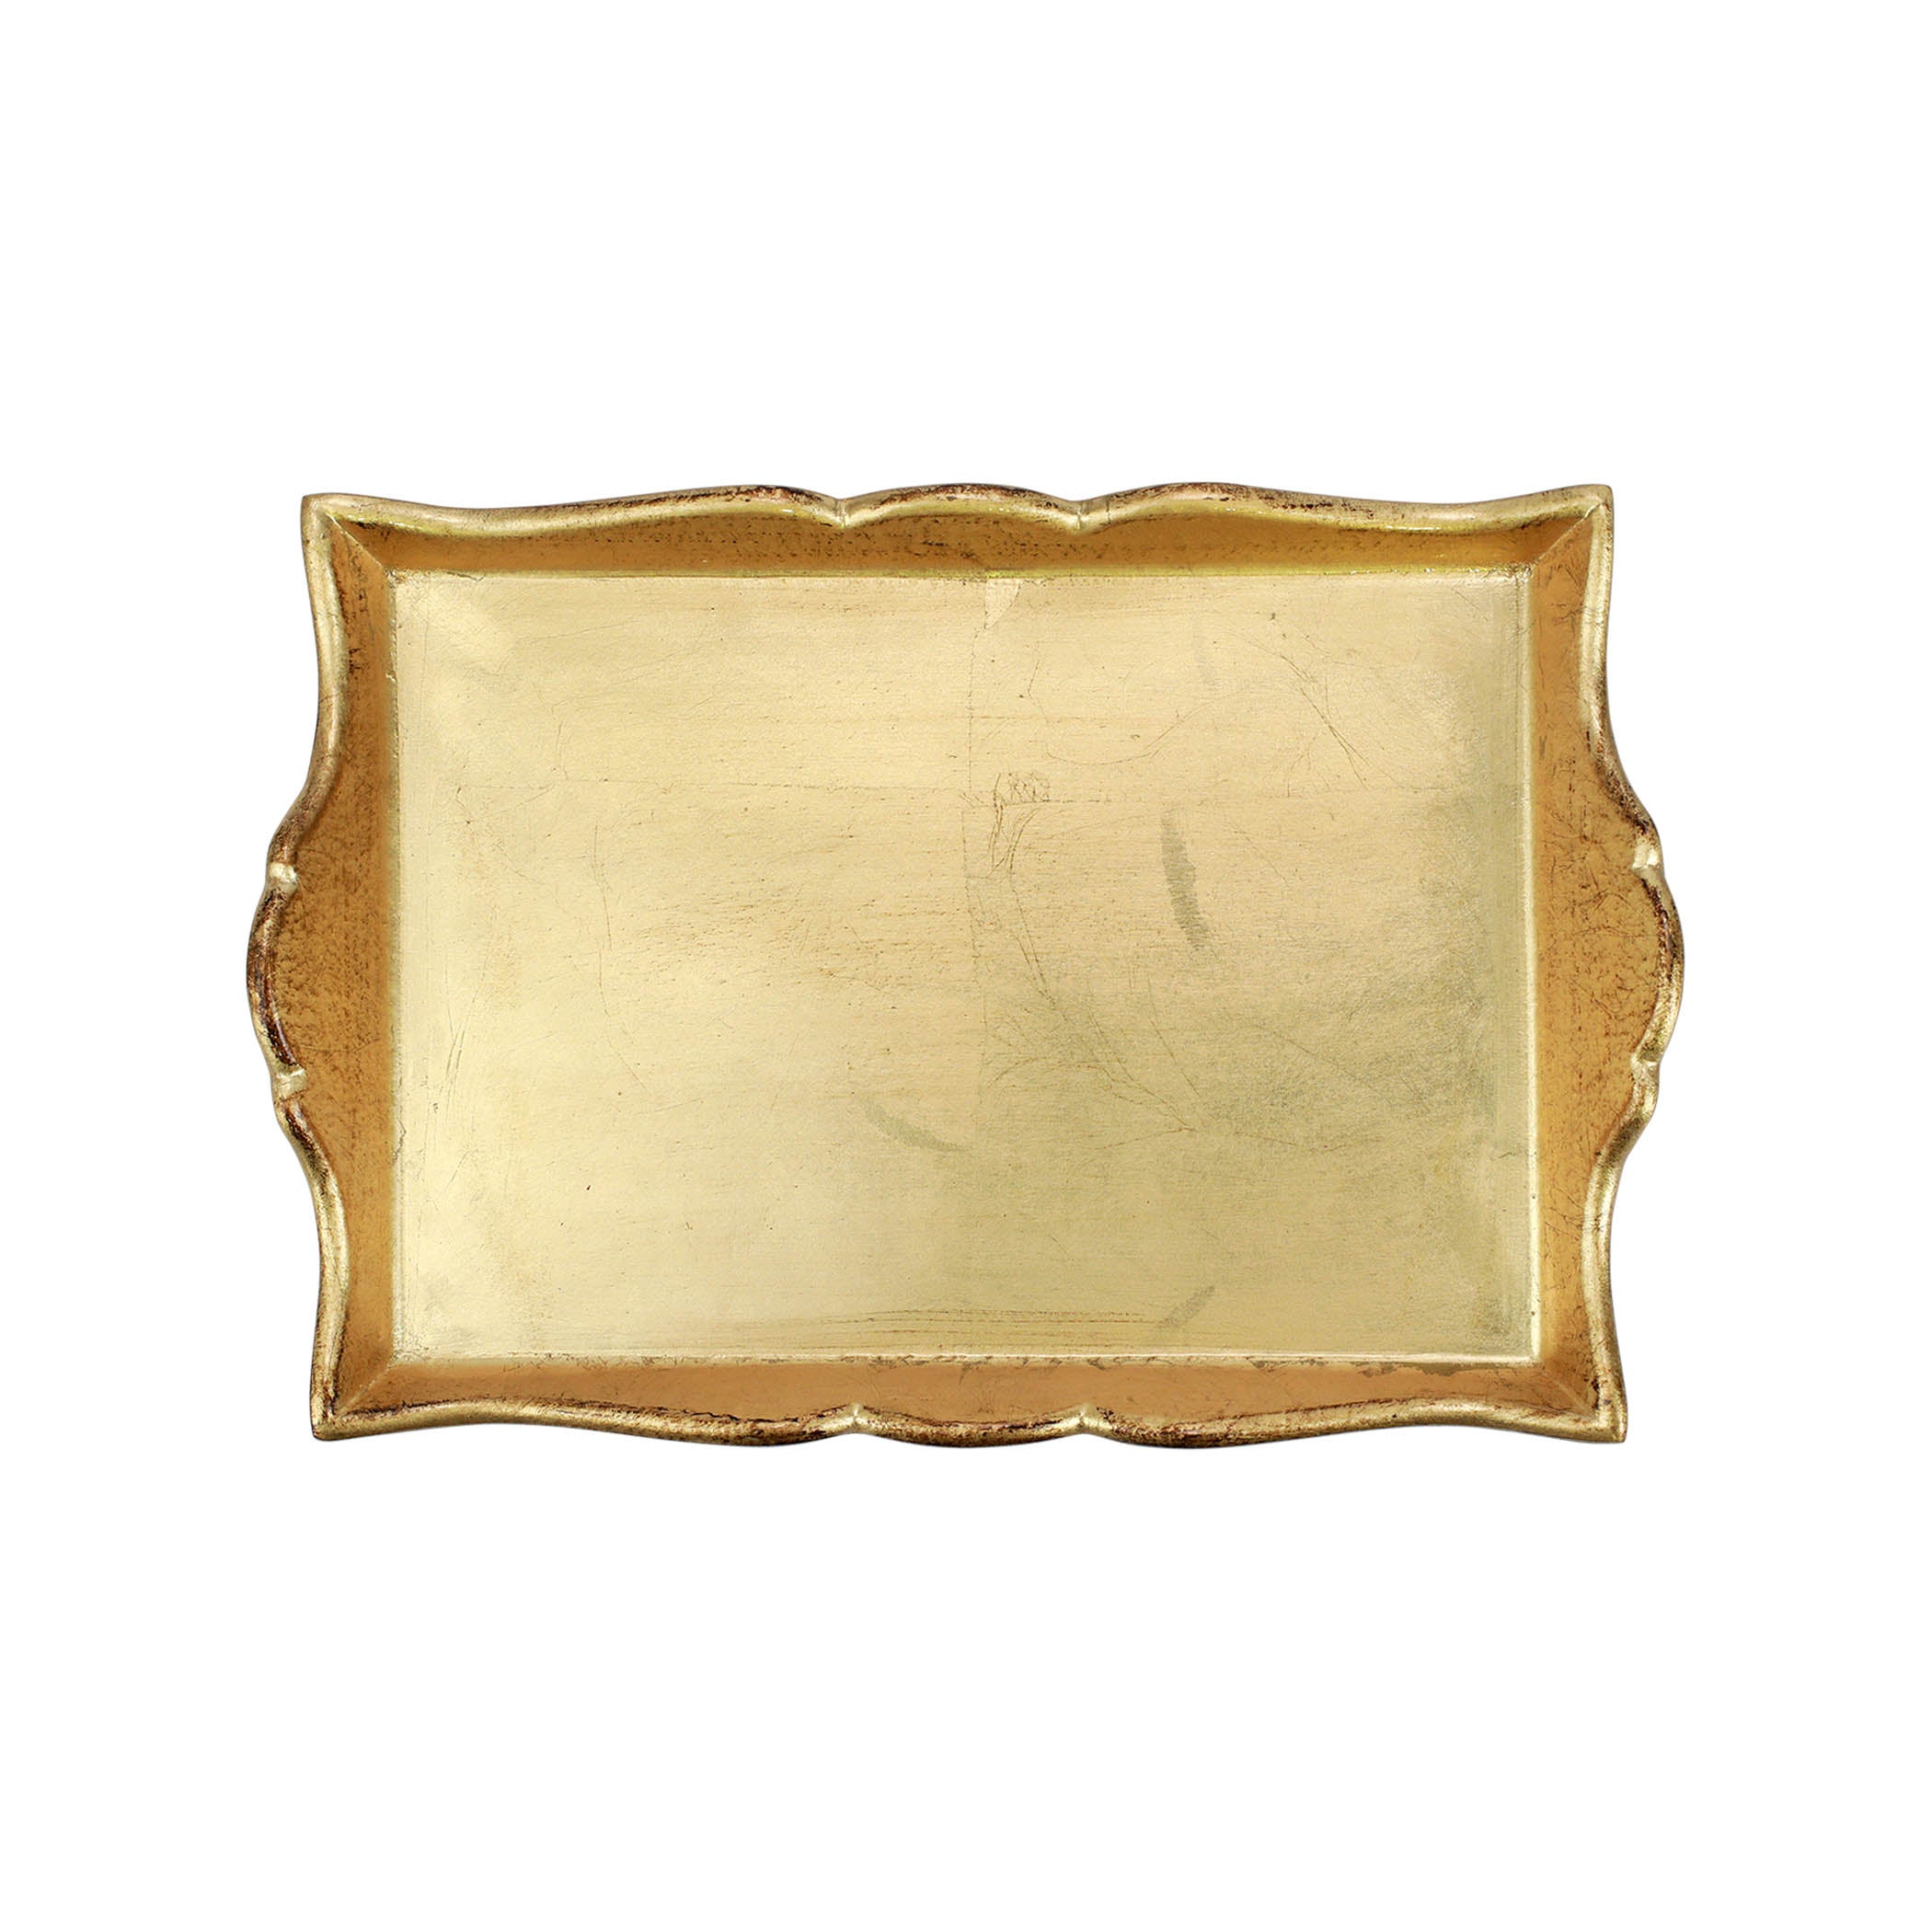 Florentine Wooden Accessories Gold Handled Small Rectangular Tray